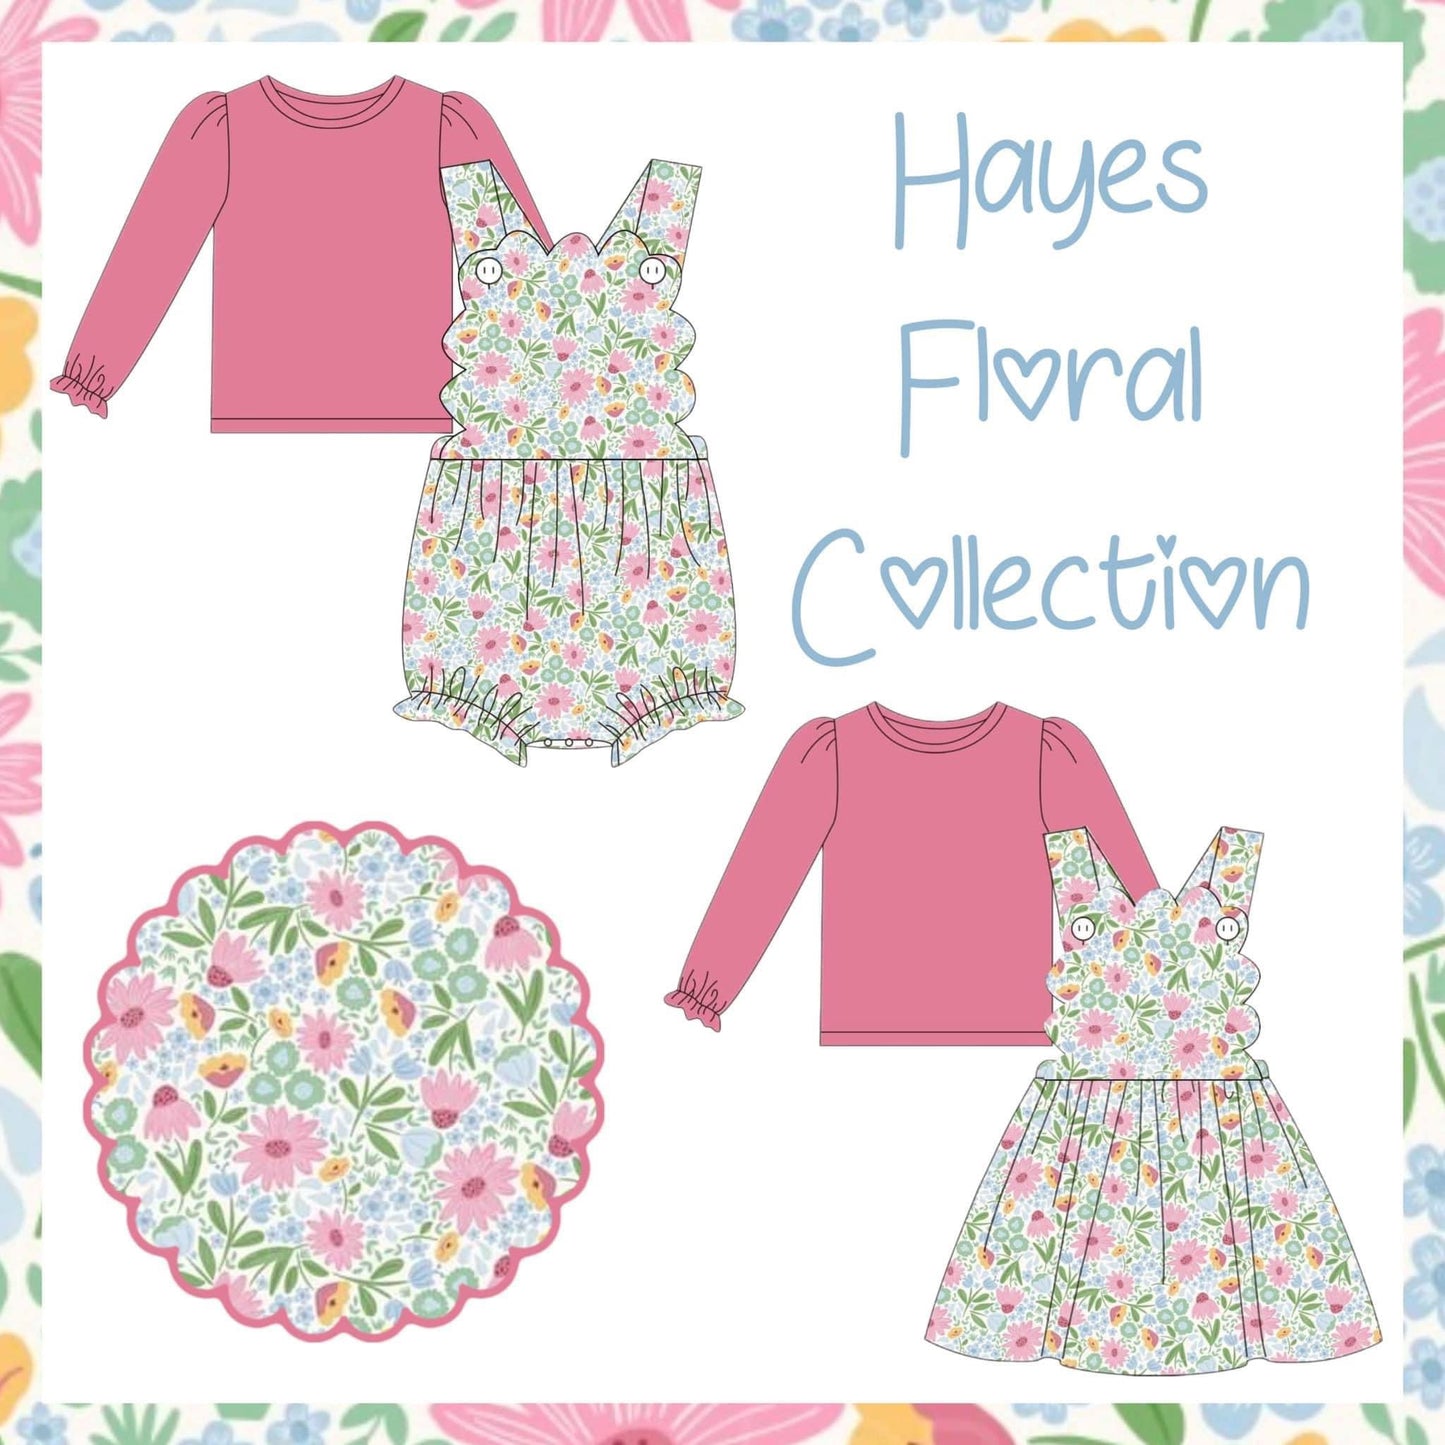 Po146-Hayes floral collectio